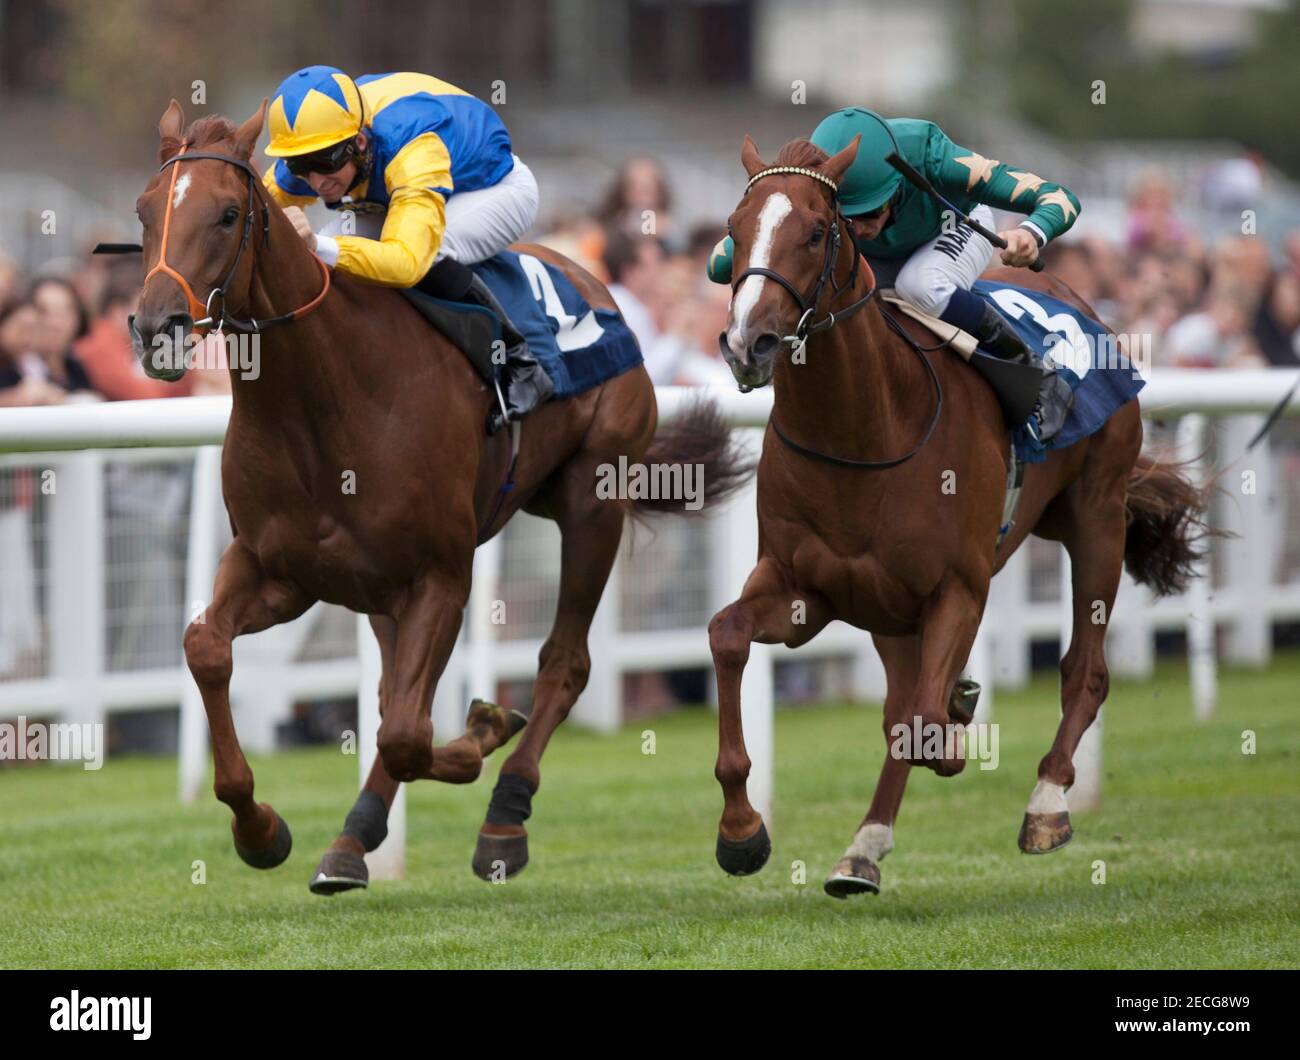 Horse Racing - Newbury - Newbury Racecourse - 4/8/13  Cricklewood Green ridden by Pat Dobbs (L) gets the better of Nezar ridden by William Buick to win the 15.15; The Grundon Recycle Nursery Handicap Stakes  Mandatory Credit: Action Images / Julian Herbert  Livepic Stock Photo